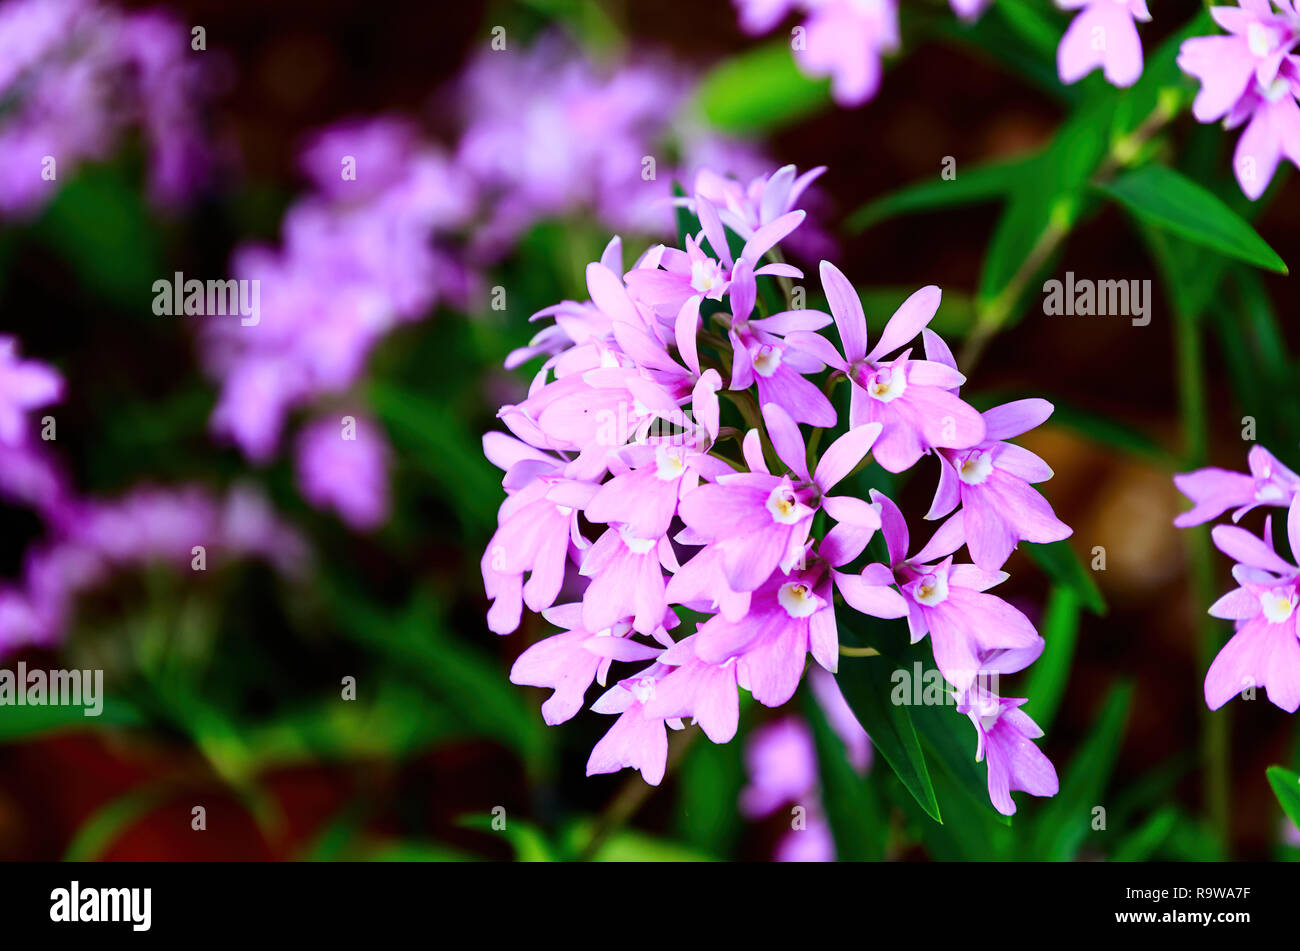 Purple Epidendrum orchid flowers - The Epidendrum orchid is known as the crucifix orchid or star orchid. Stock Photo